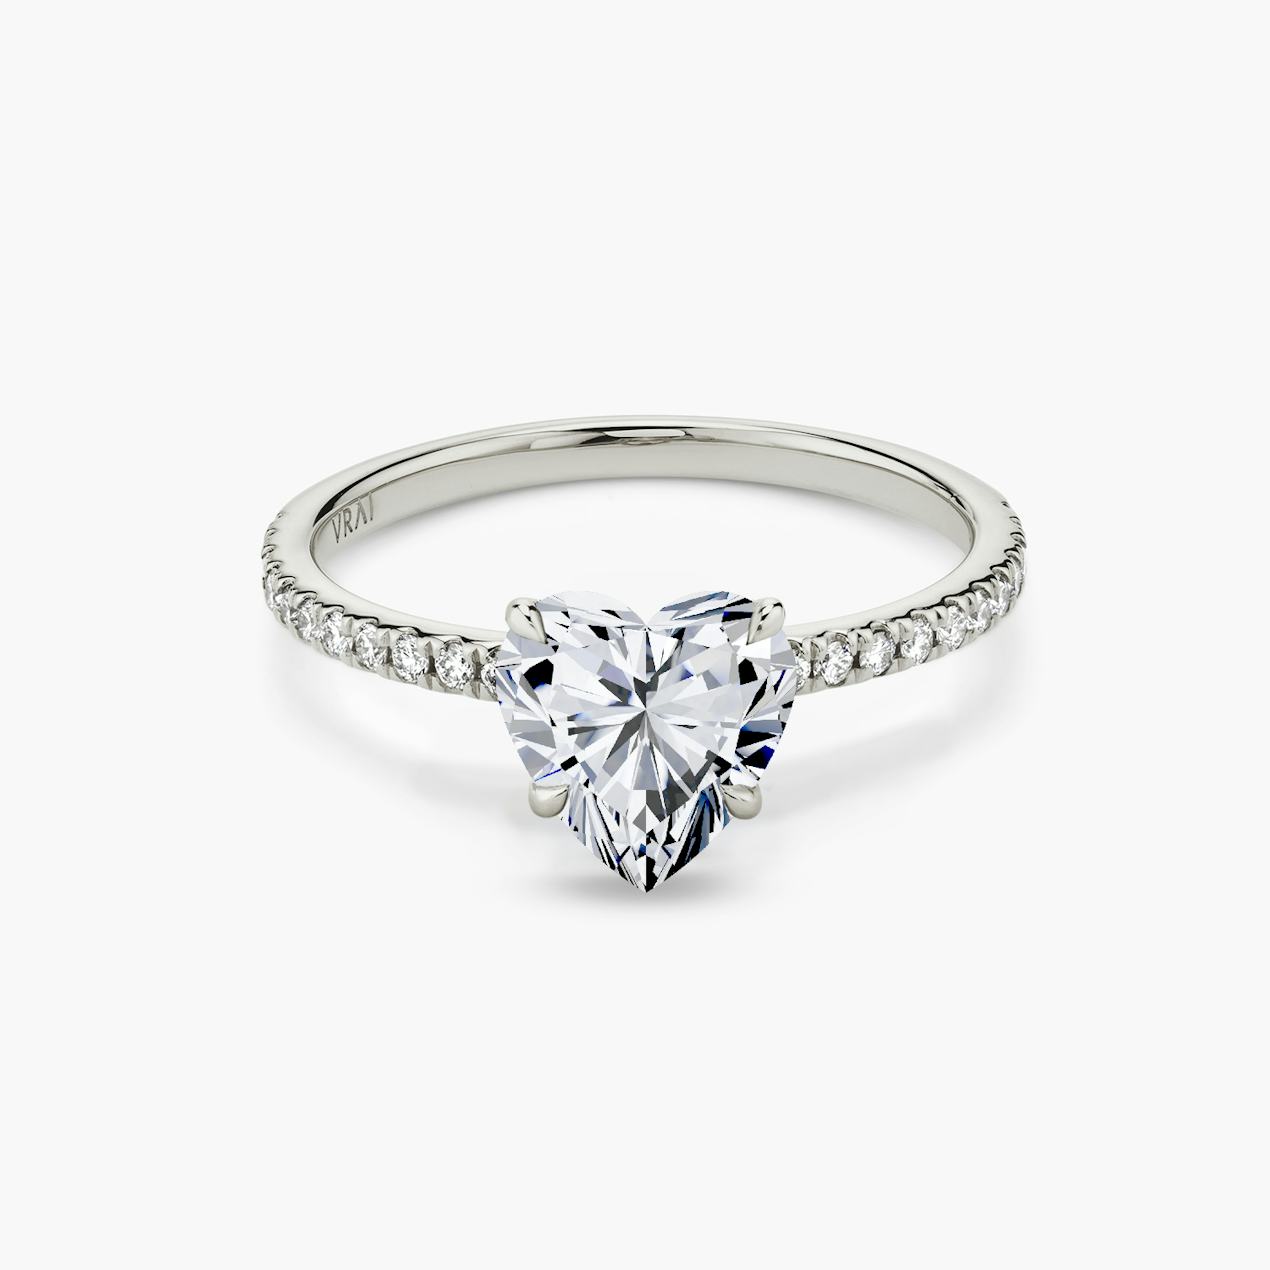 The Signature Heart Ring